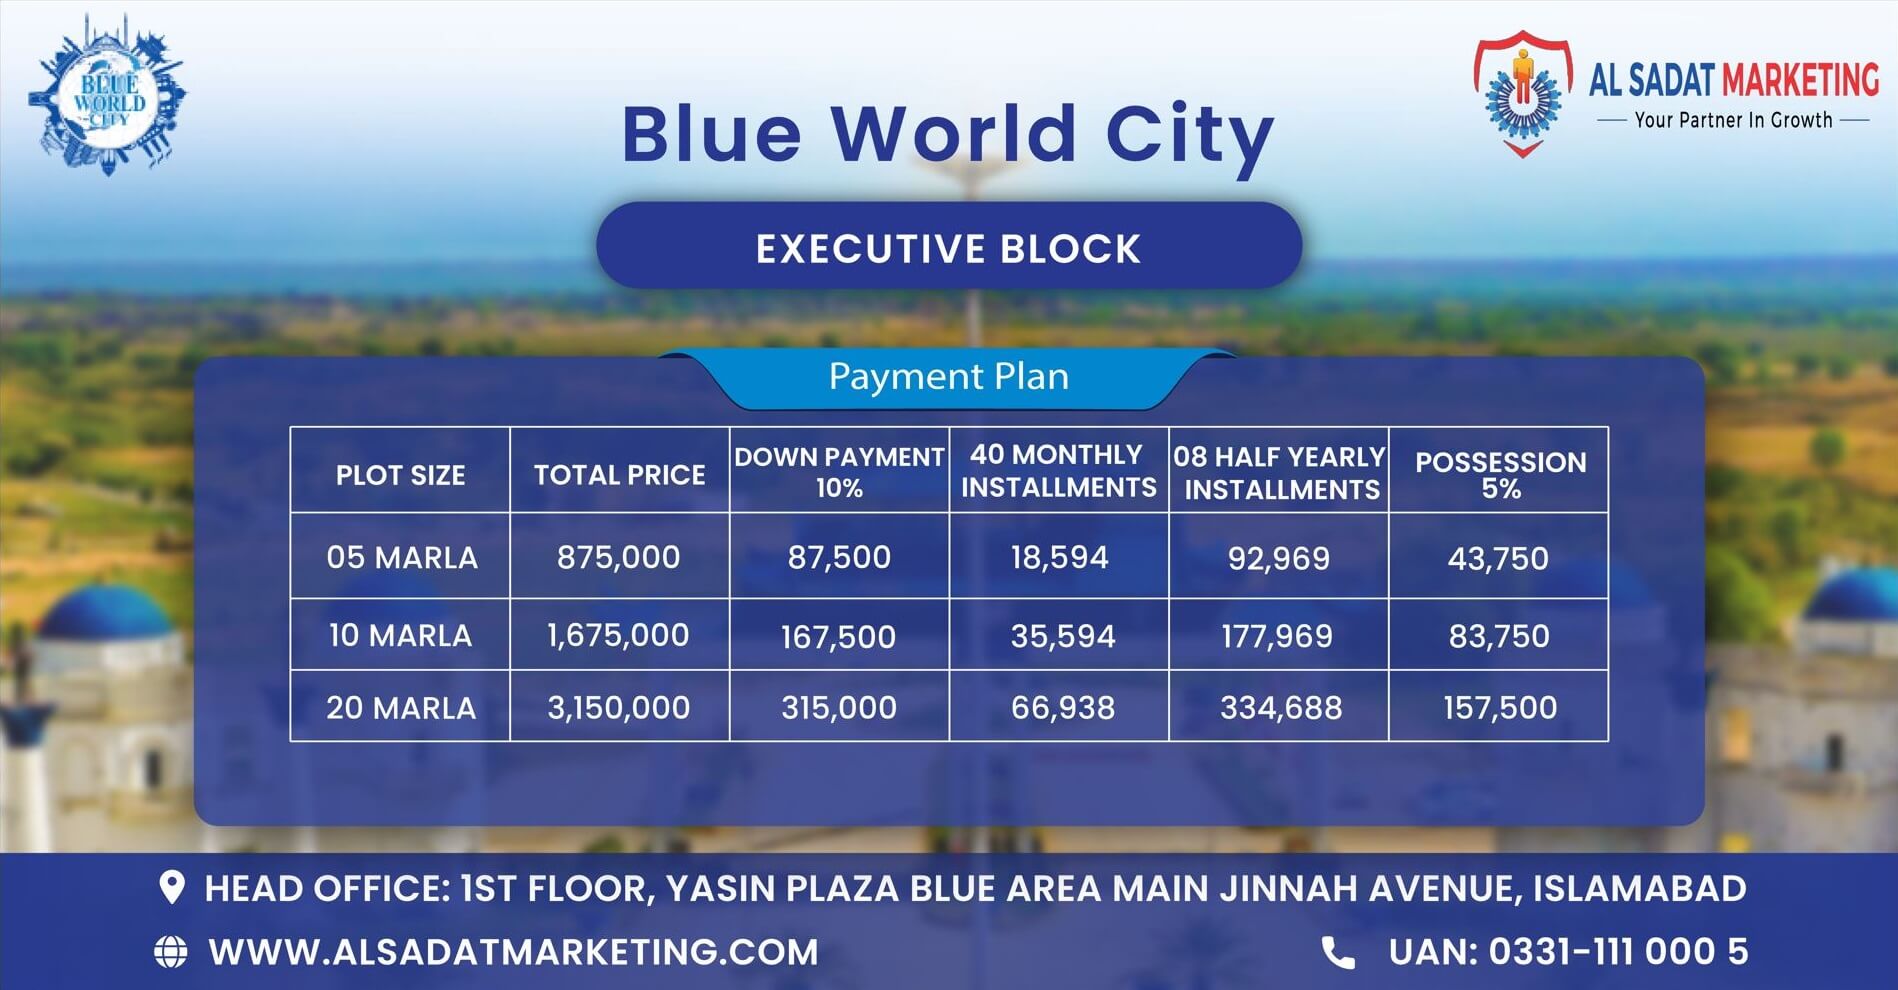 blue world city executive block residential plots detailed payment plan – blue world city islamabad executive block residential plots detailed payment plan – blue world city rawalpindi executive block residential plots detailed payment plan – blue world city executive block payment plan – blue world city islamabad executive block payment plan – blue world city rawalpindi executive block payment plan – blue world city payment plan – blue world city islamabad payment plan - blue world city rawalpindi payment plan – blue world city– blue world city islamabad – blue world city rawalpindi– blue world city housing society – blue world city islamabad housing society – blue world city real estate project – blue world city islamabad real estate project - al sadat marketing - alsadat marketing - al-sadat marketing